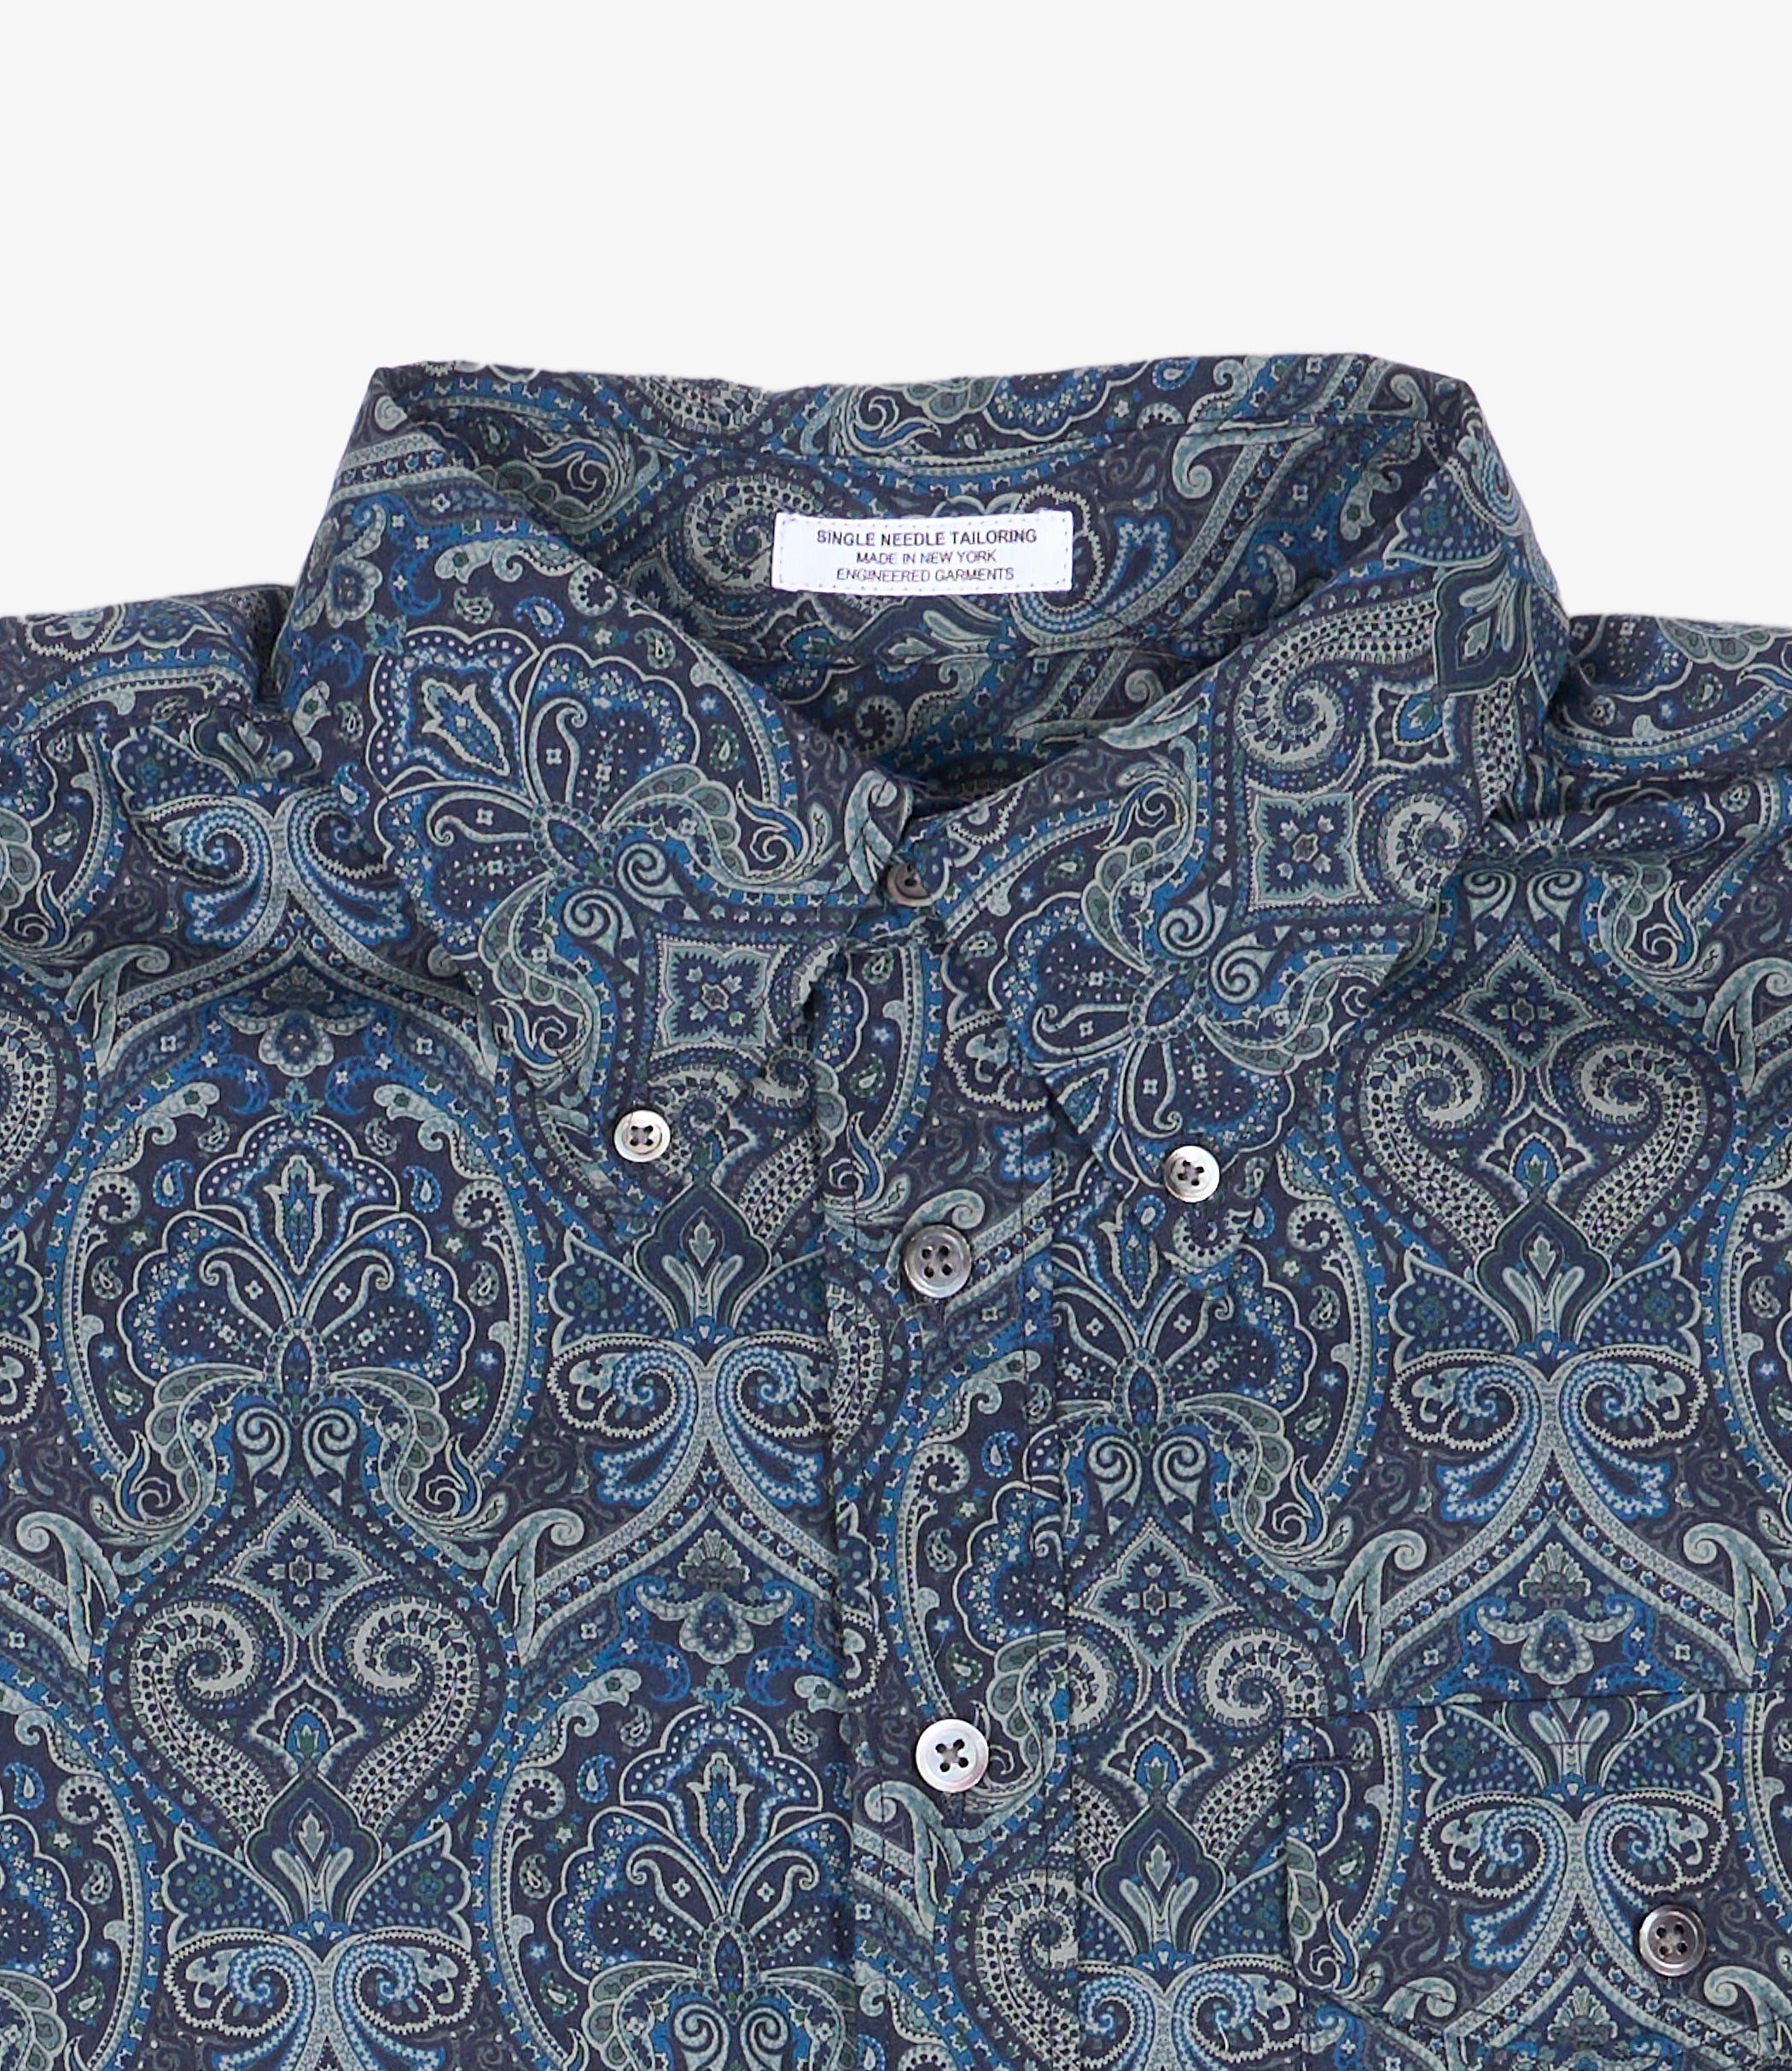 Nepenthes Special - Ivy BD Shirt - Navy Cotton Paisley Print